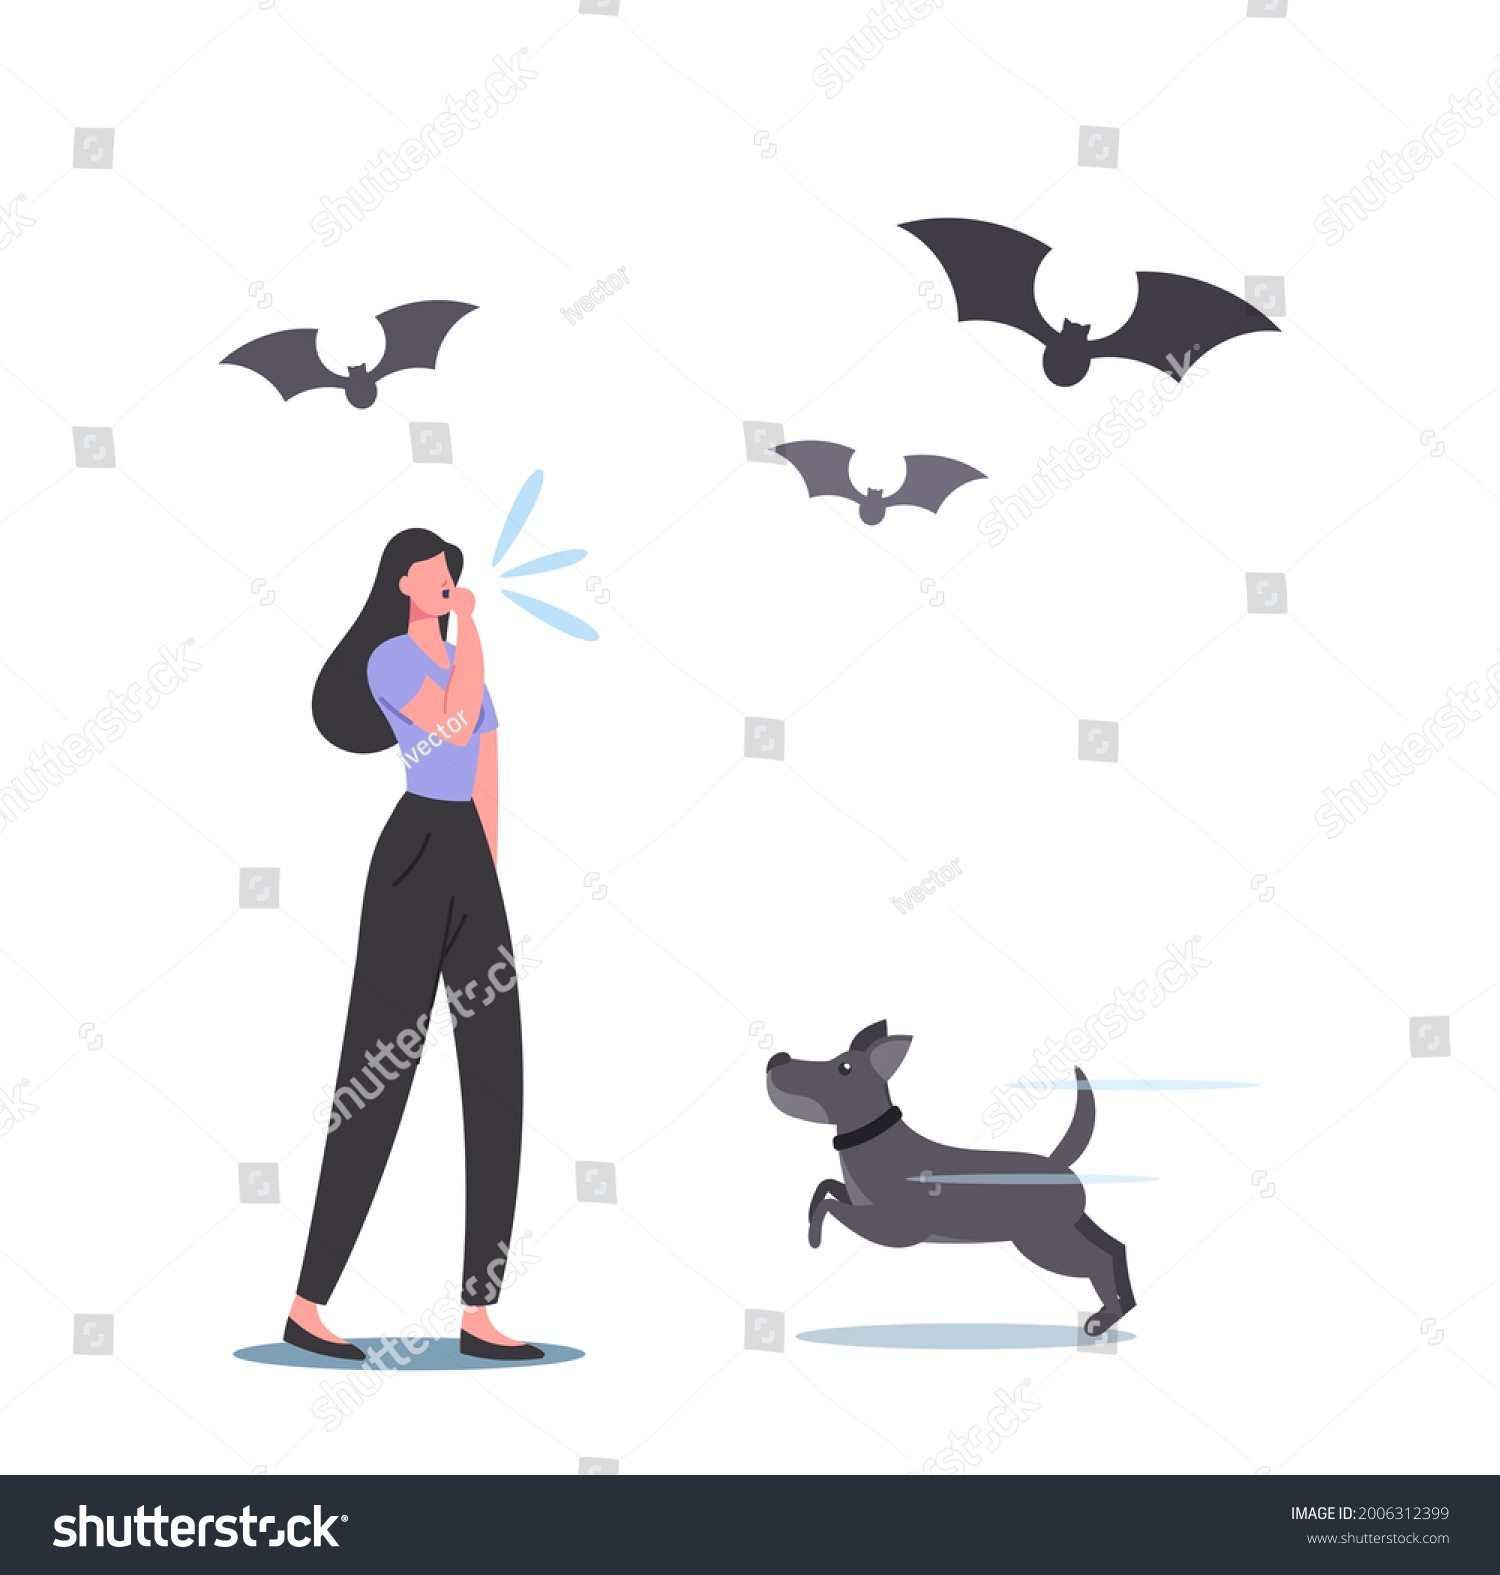 SVG of Female Character Whistle Call Dog during Outdoor Walk or Training, Bats and Doggy Listen Ultra Sound Frequency Waves in Nature which Human cant Hear. Cartoon People Vector Illustration svg